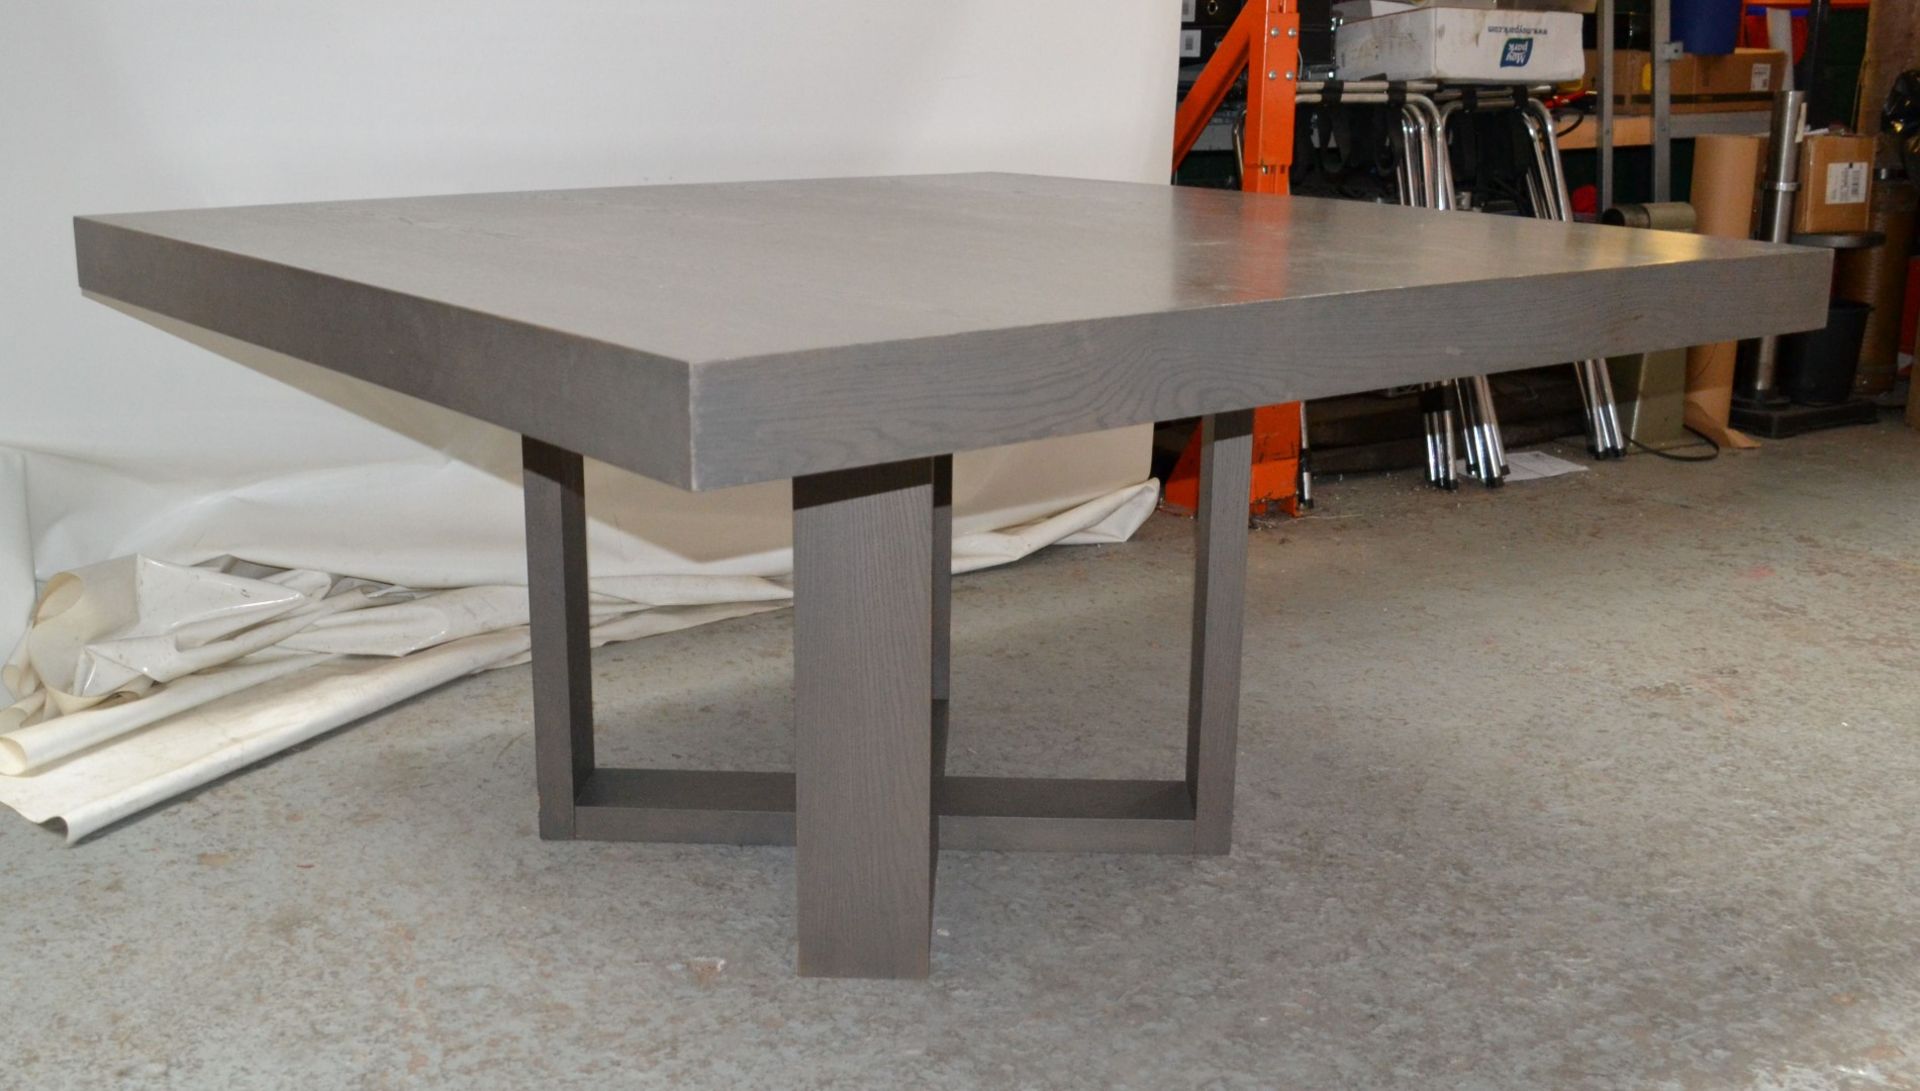 1 x Large Square Wooden Table in Grey Oak Coloured Finish - CL314 - Location: Altrincham WA14 - *NO - Image 2 of 10